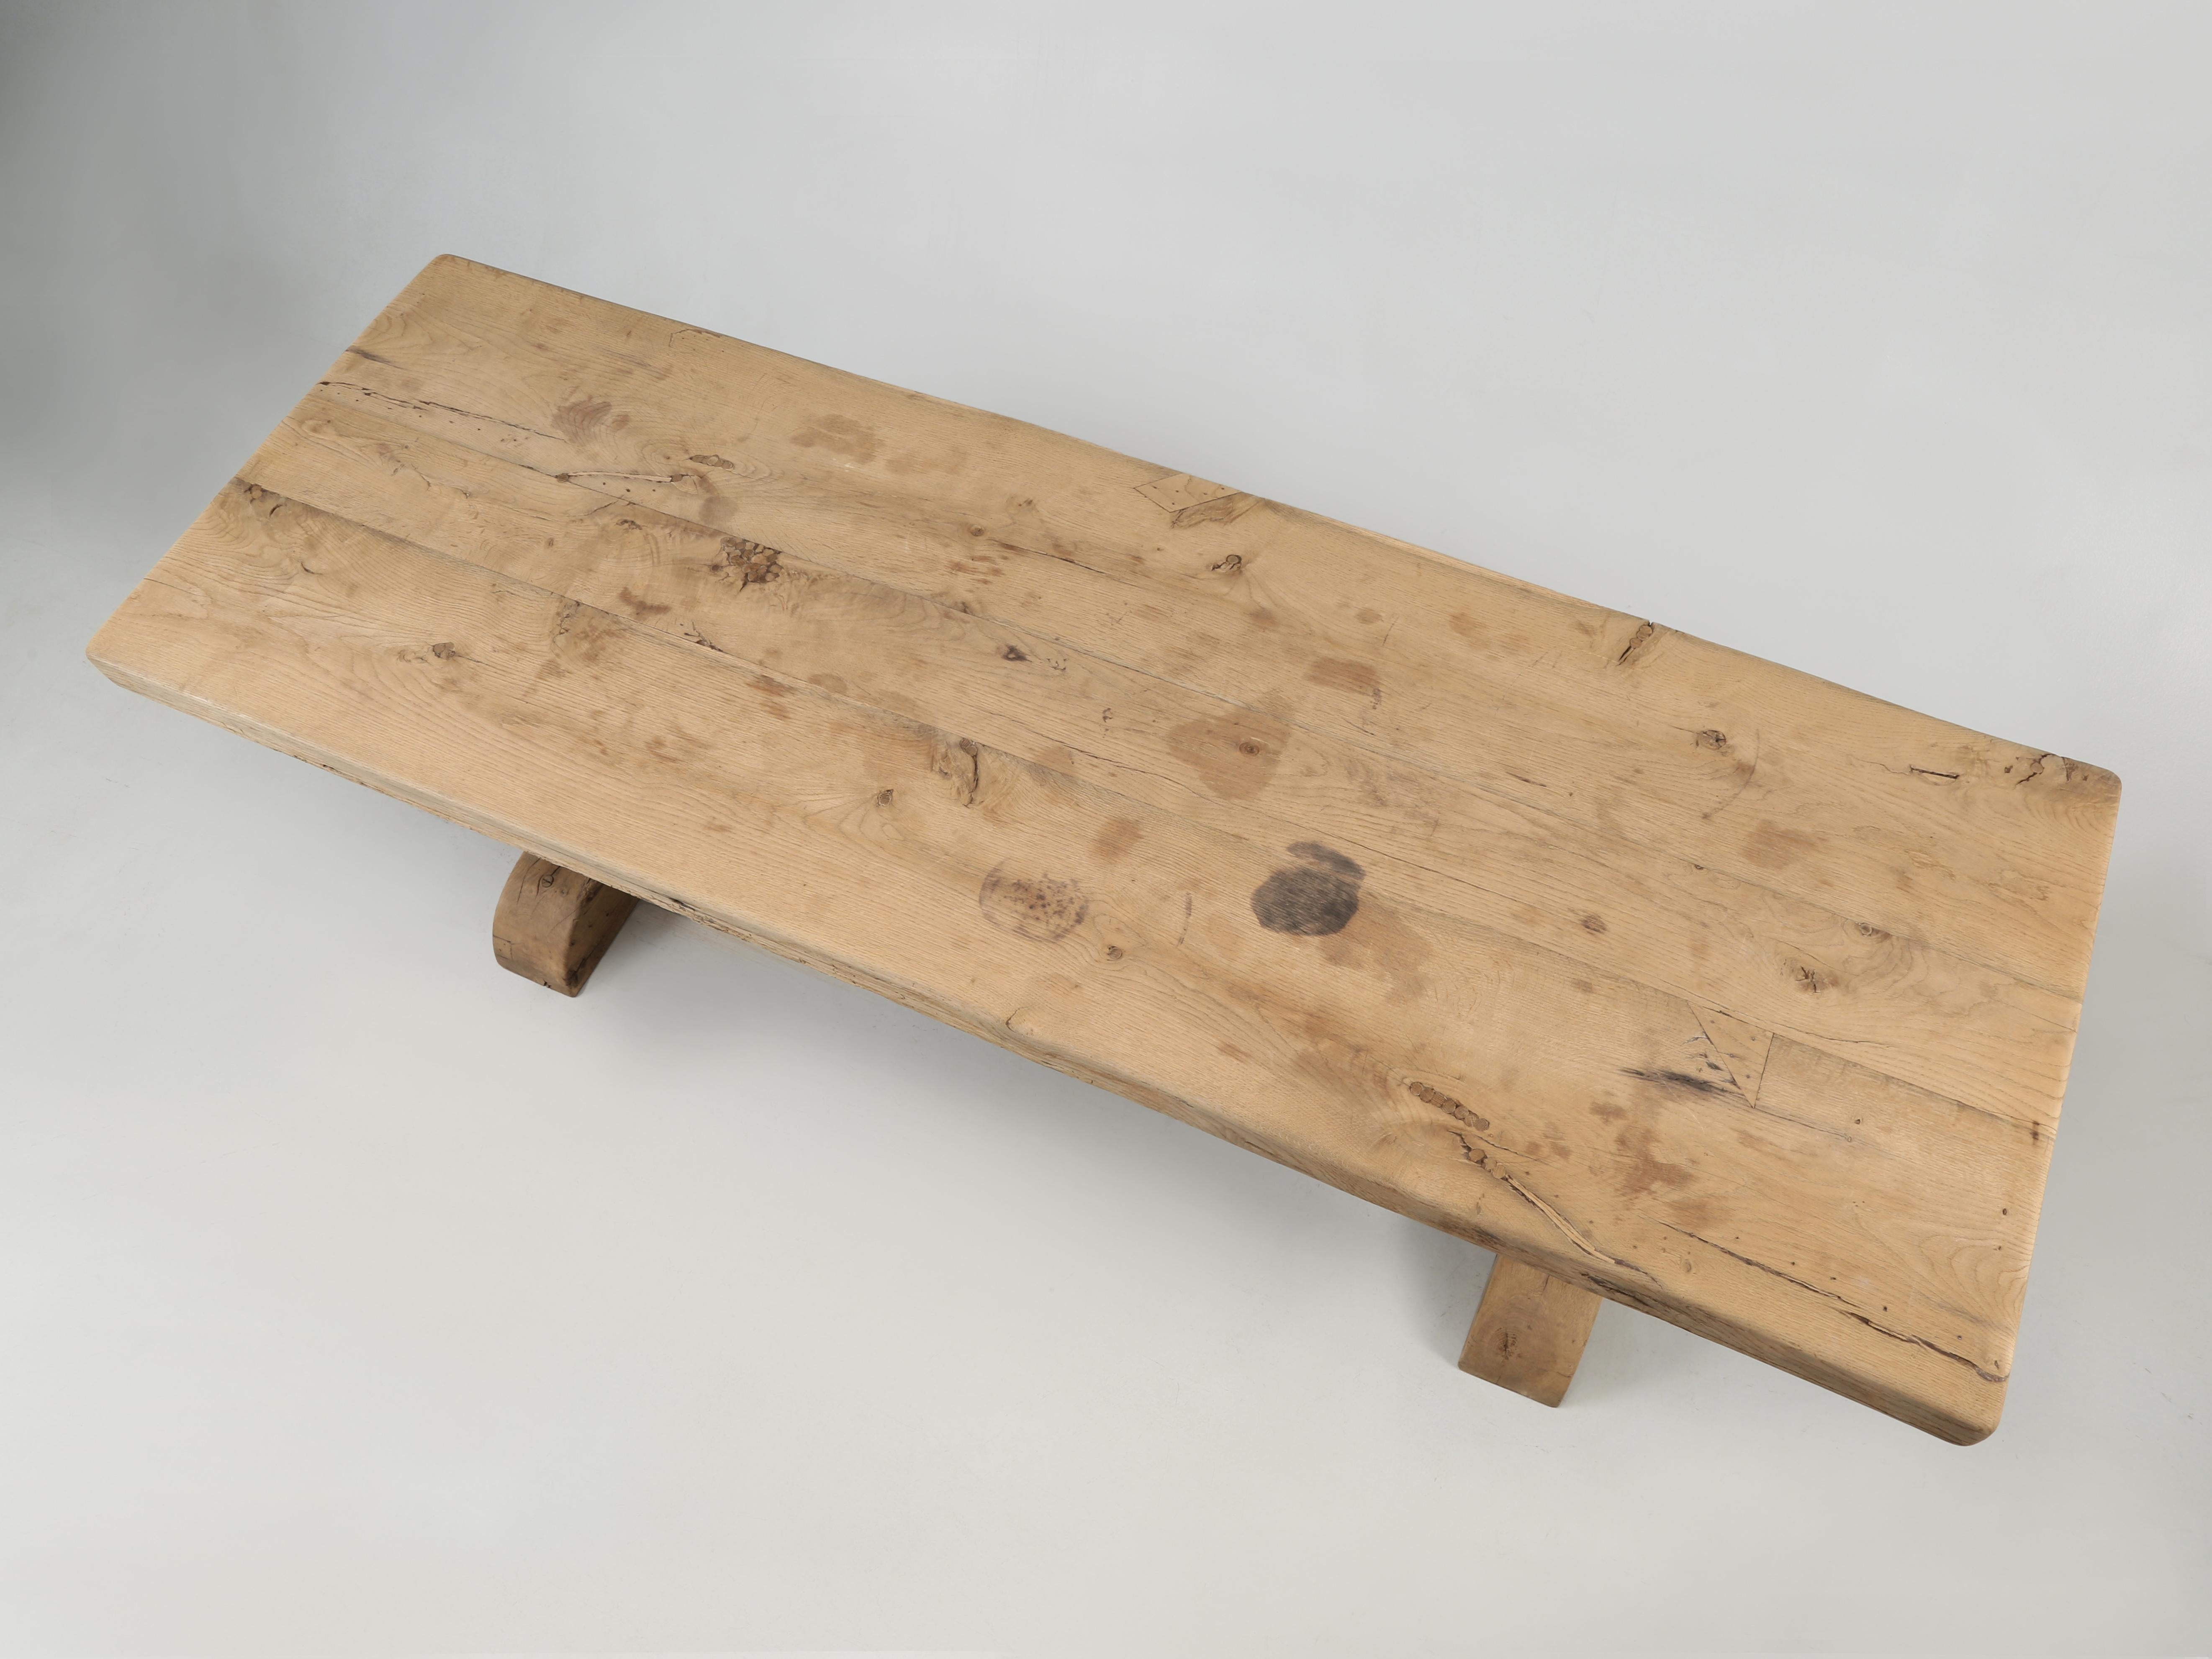 French Antique Trestle Farm Table from the Provence. Old Plank has been specializing in Antique French Farm Tables and Antique French Trestle Dining Tables and this antique French Table seems to straddle the line, between Trestle and Farm Table.